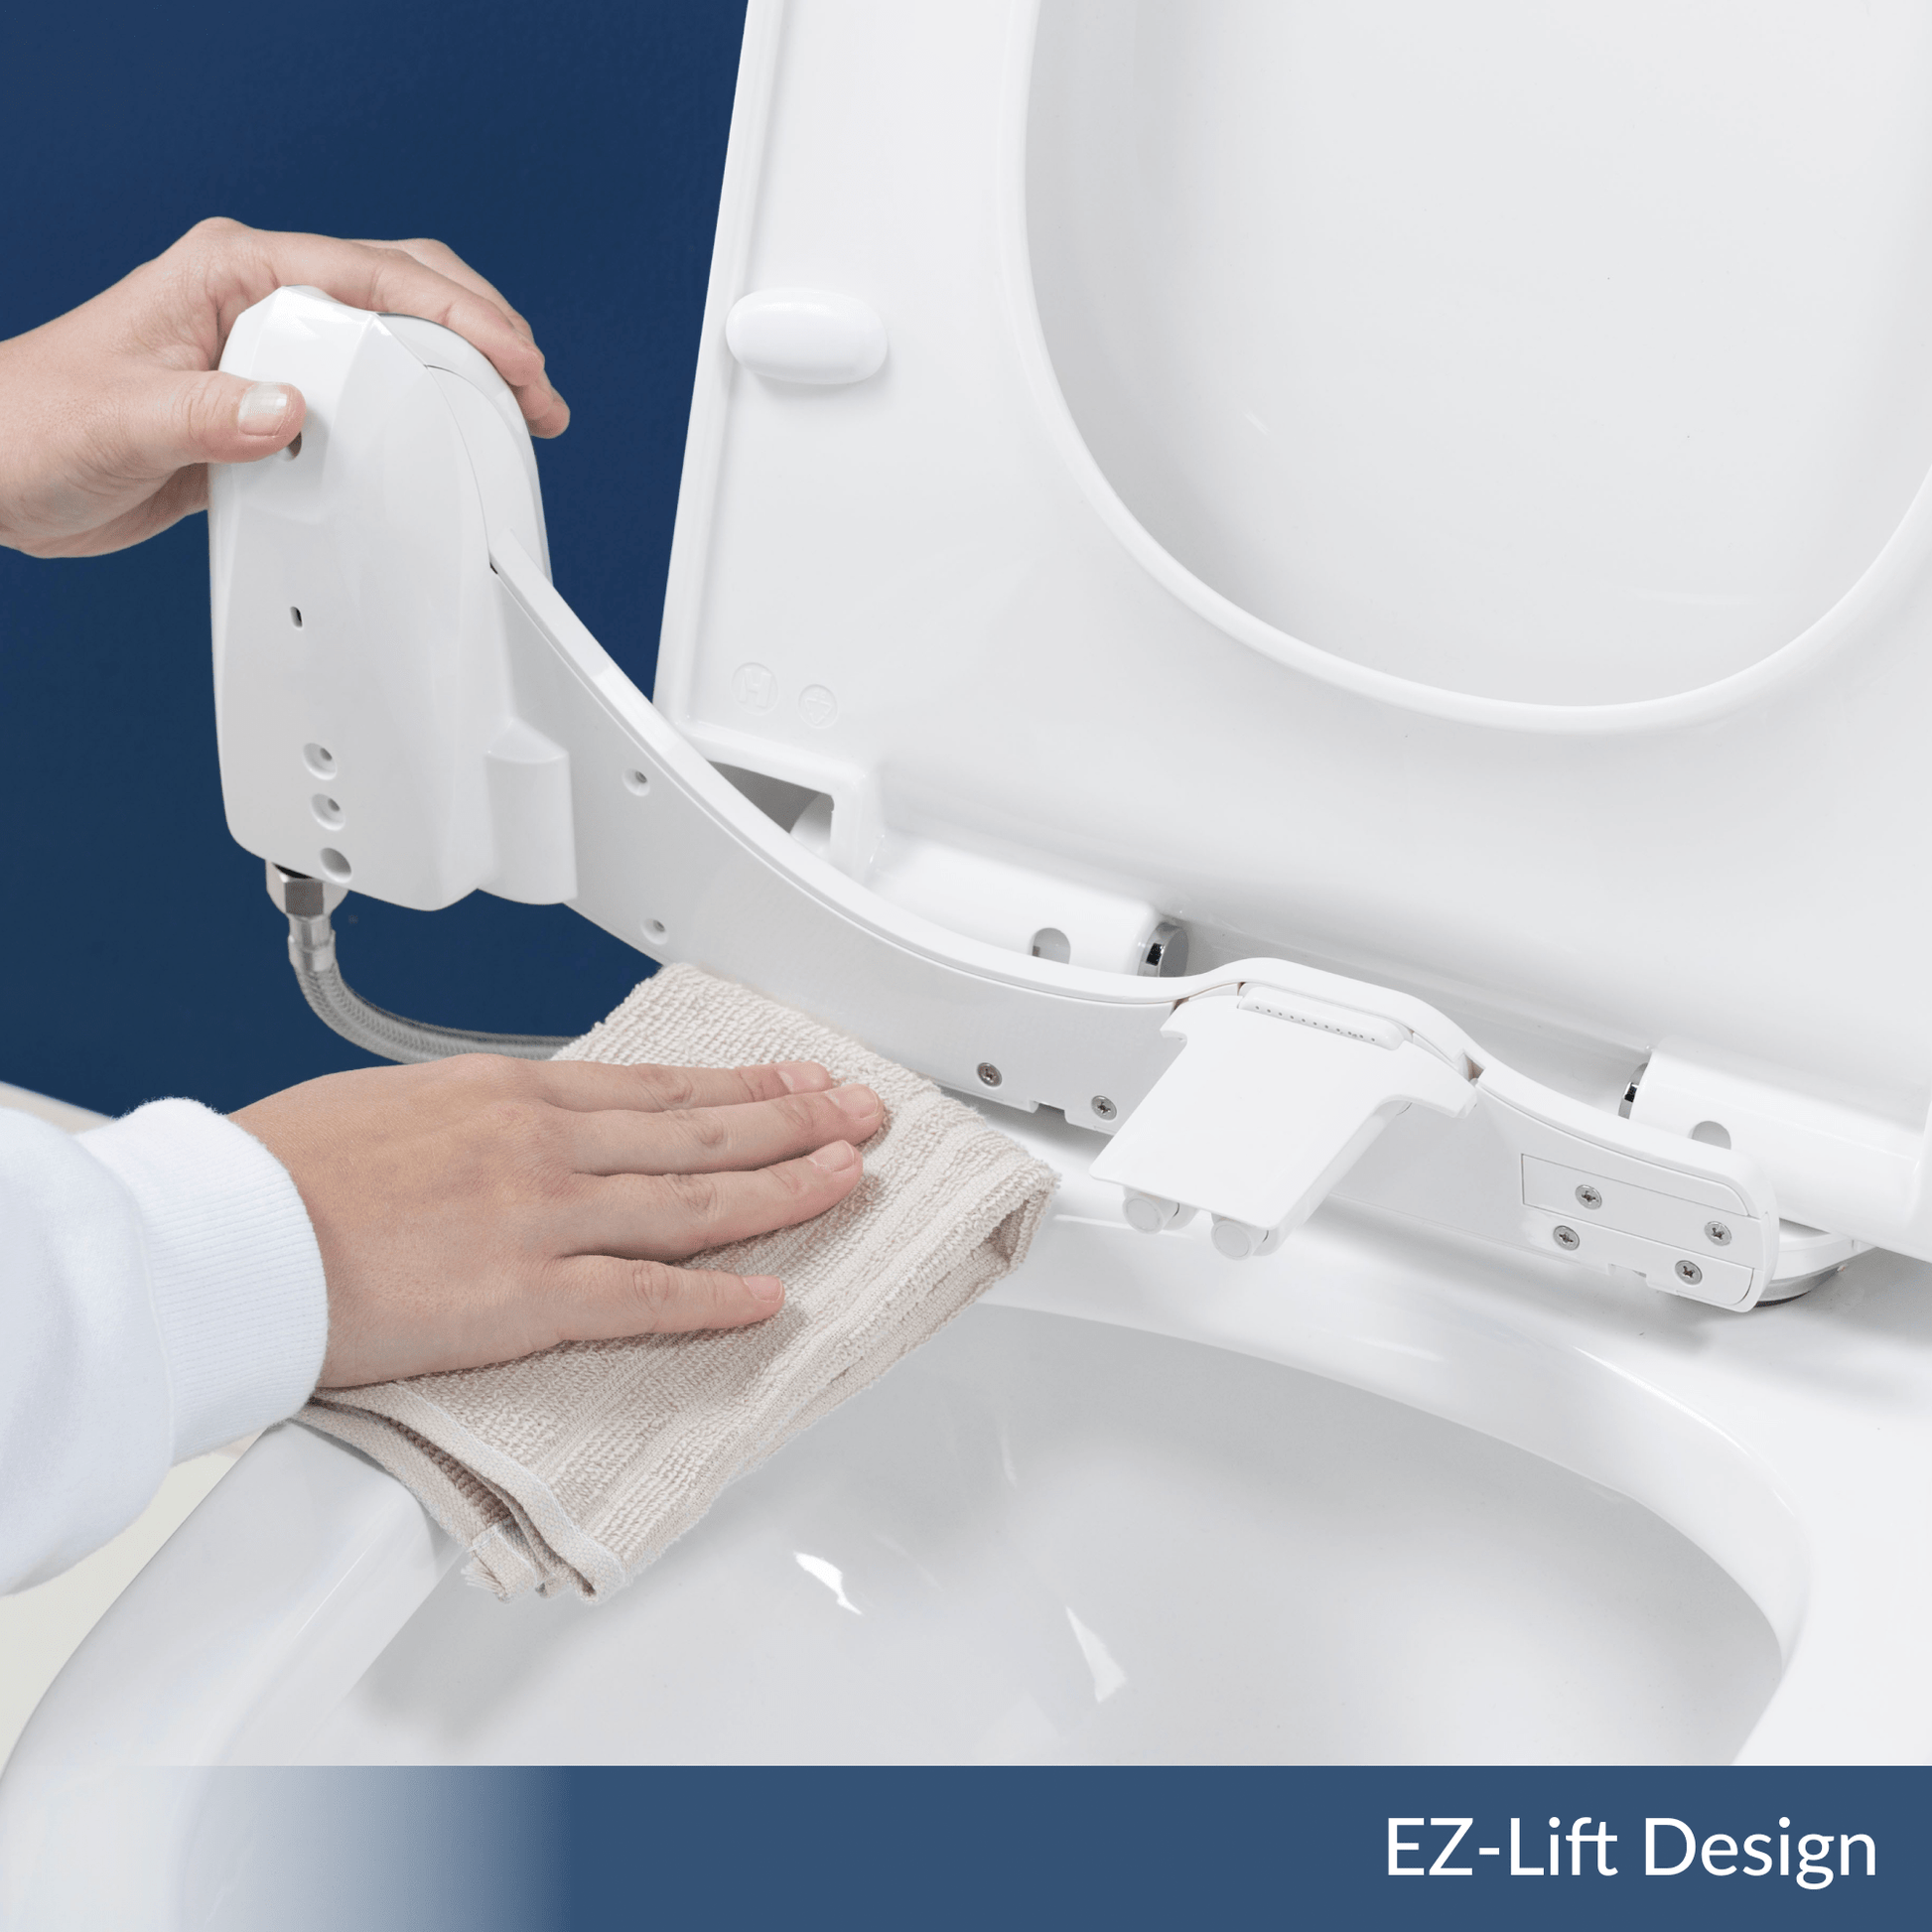 EZ-Lift feature of NEO Plus series allows user to lift up the bidet to clean the toilet bowl easily